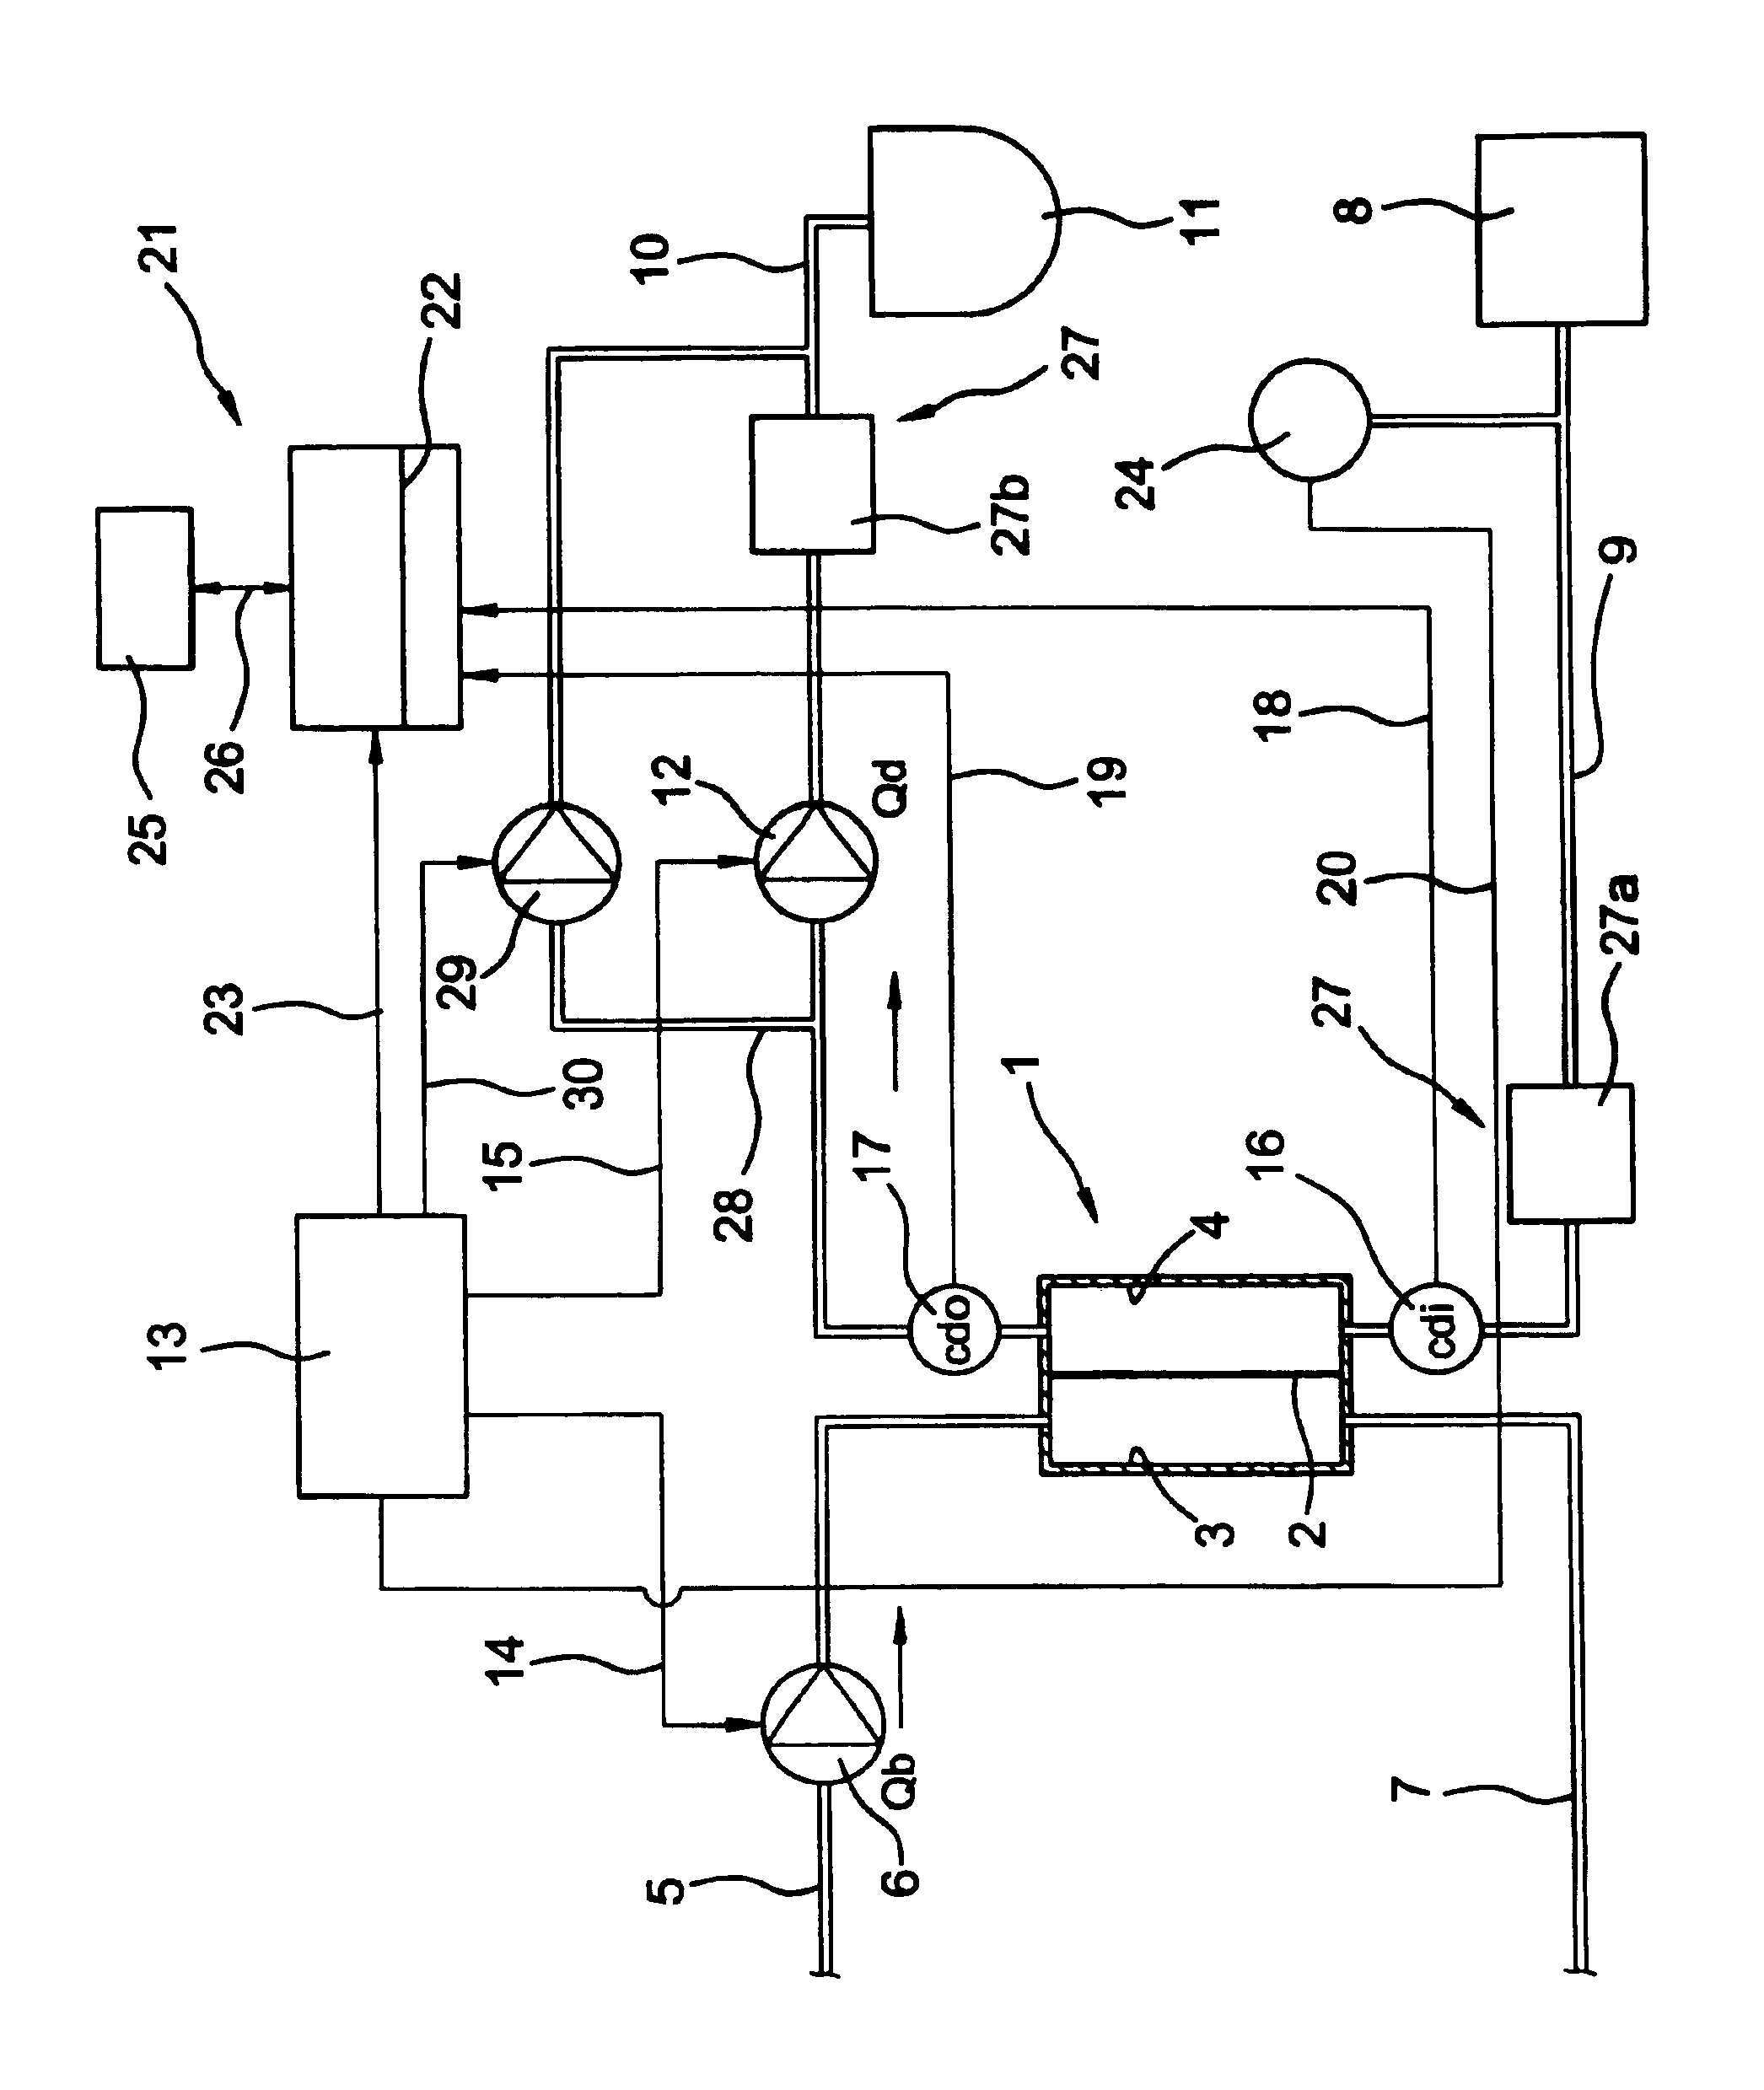 Method of determining the efficiency of a dialyzer of a dialysis machine and a dialysis machine for carrying out this method